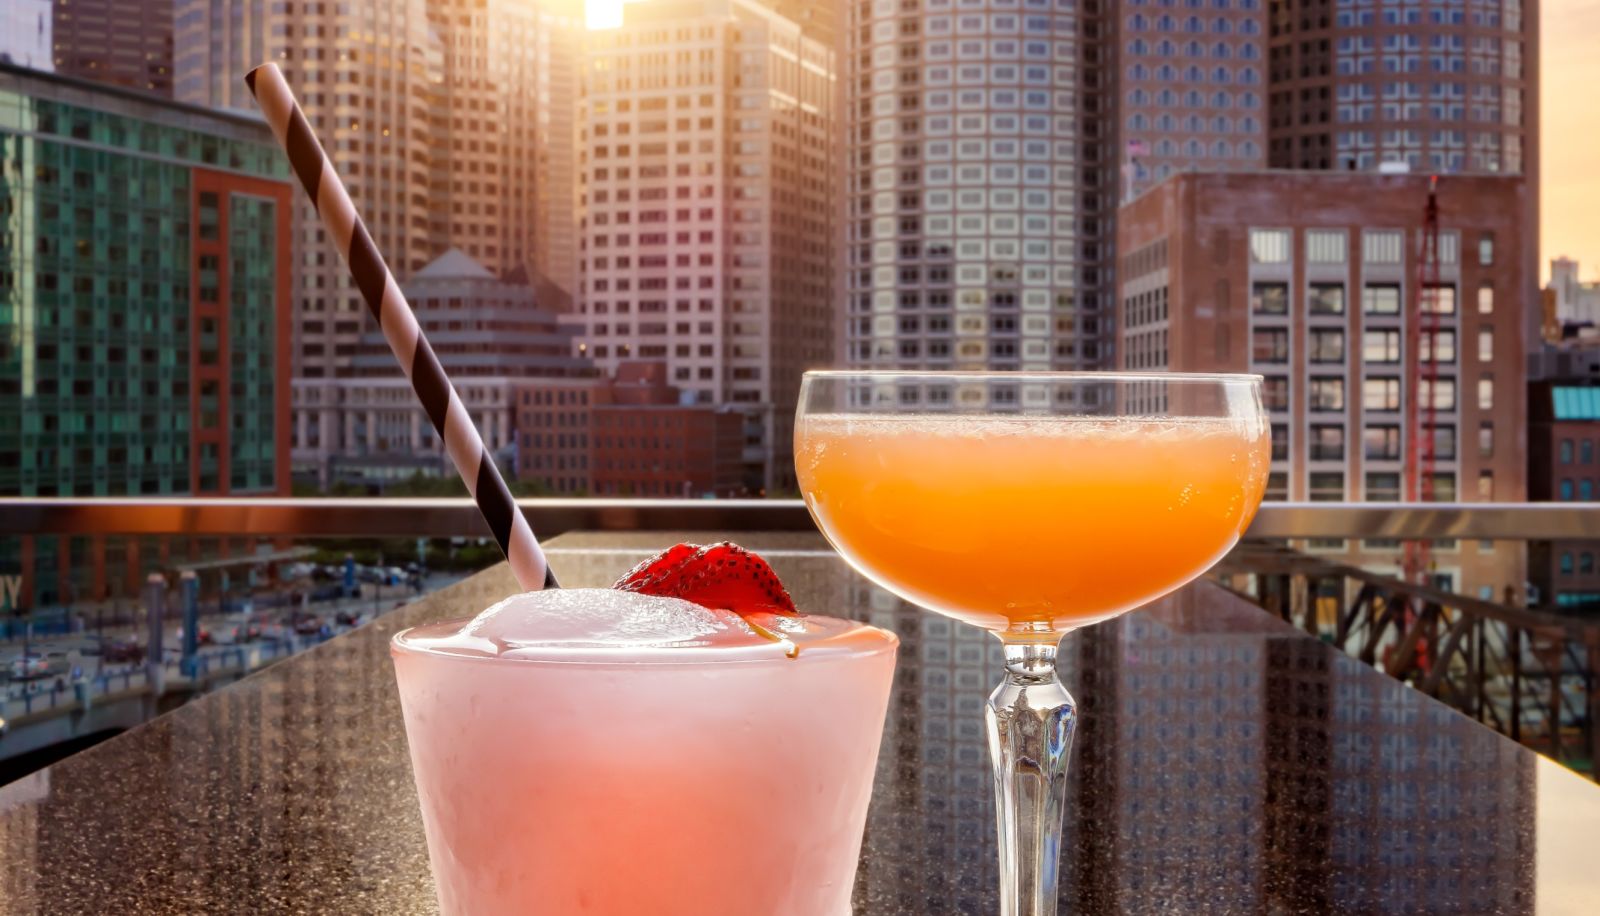 Two Glasses Of Drinks With Straws And A City Skyline In The Background